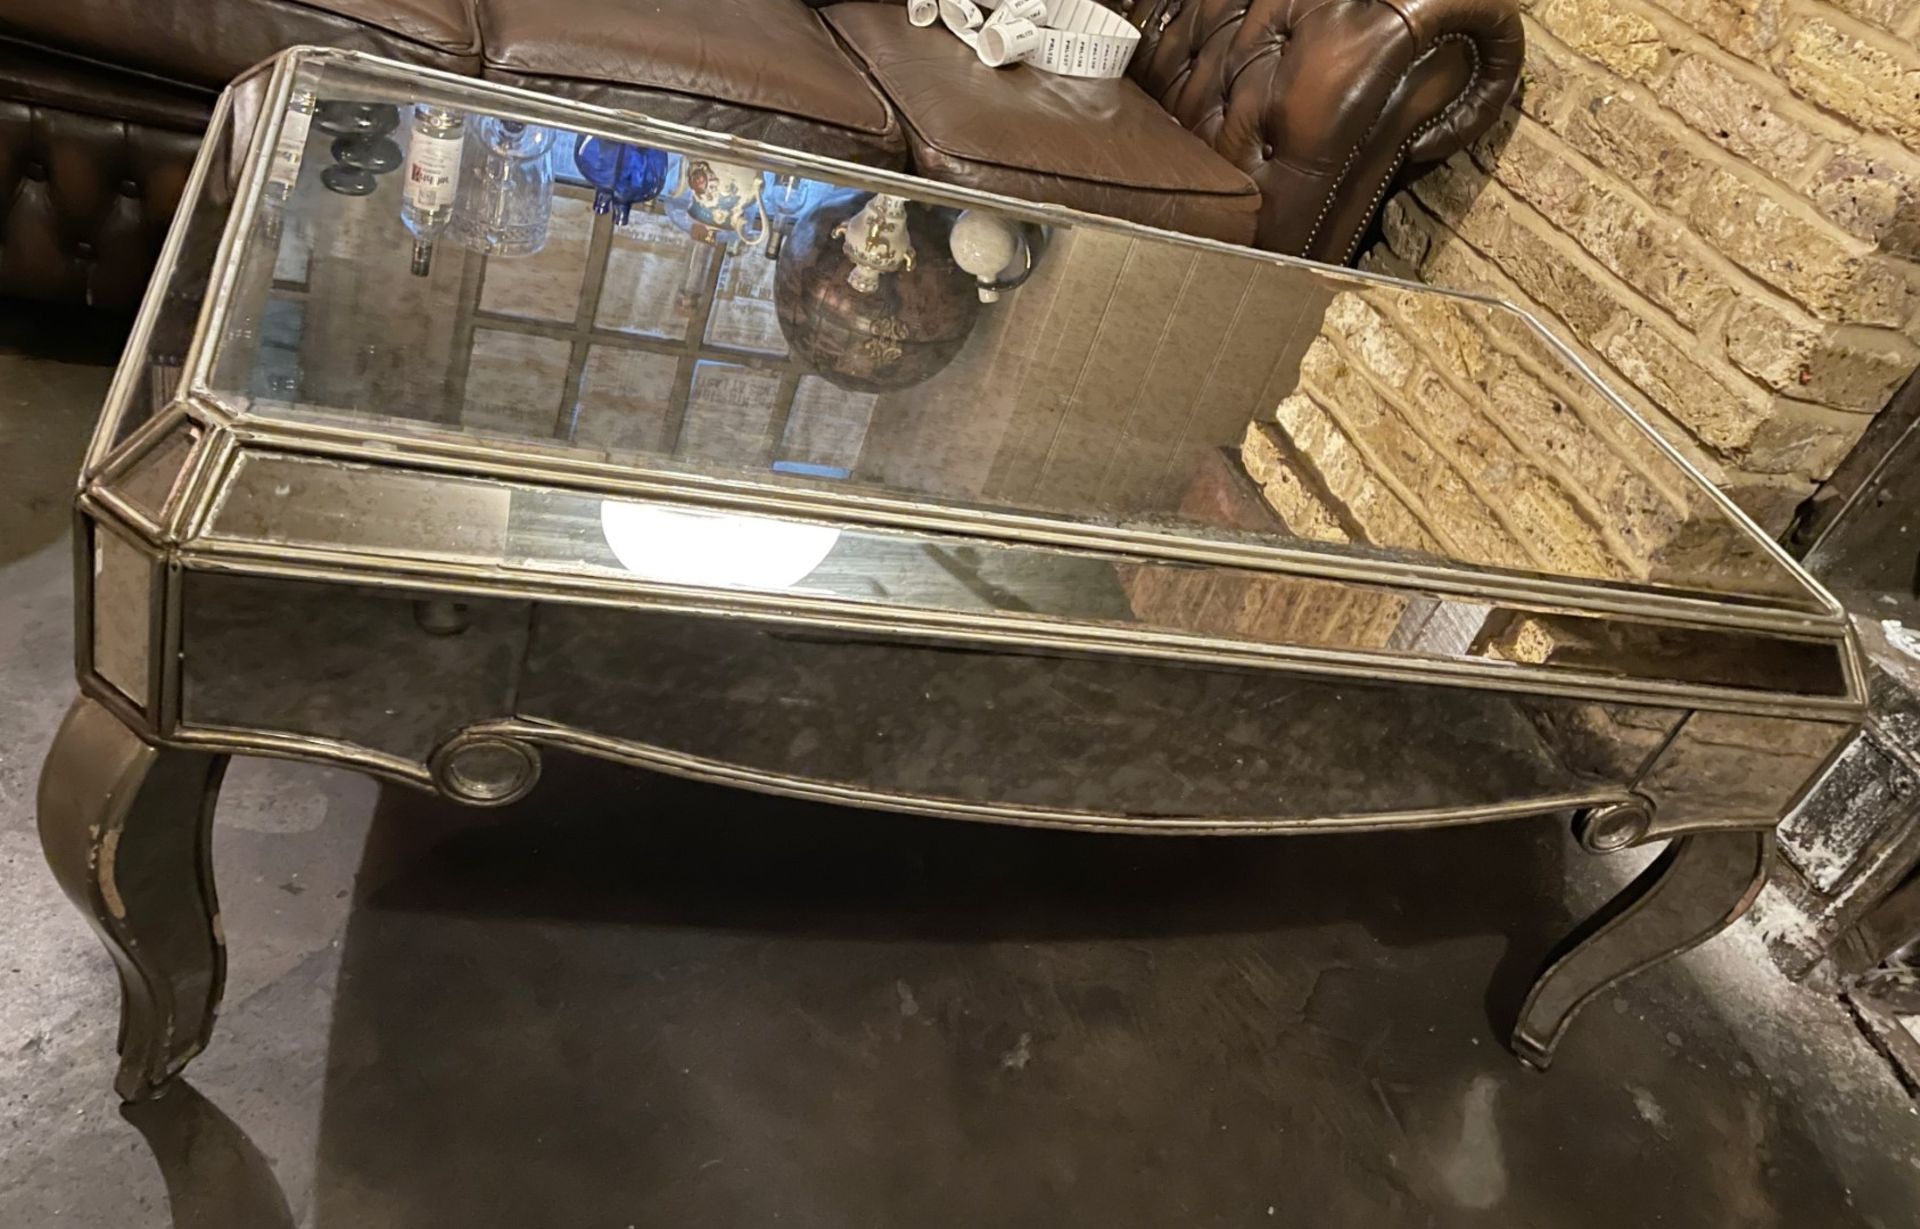 1 x Vintage French-style Mirrored Rectangular Cocktail Coffee Table with an Aged Aesthetic - Image 7 of 10